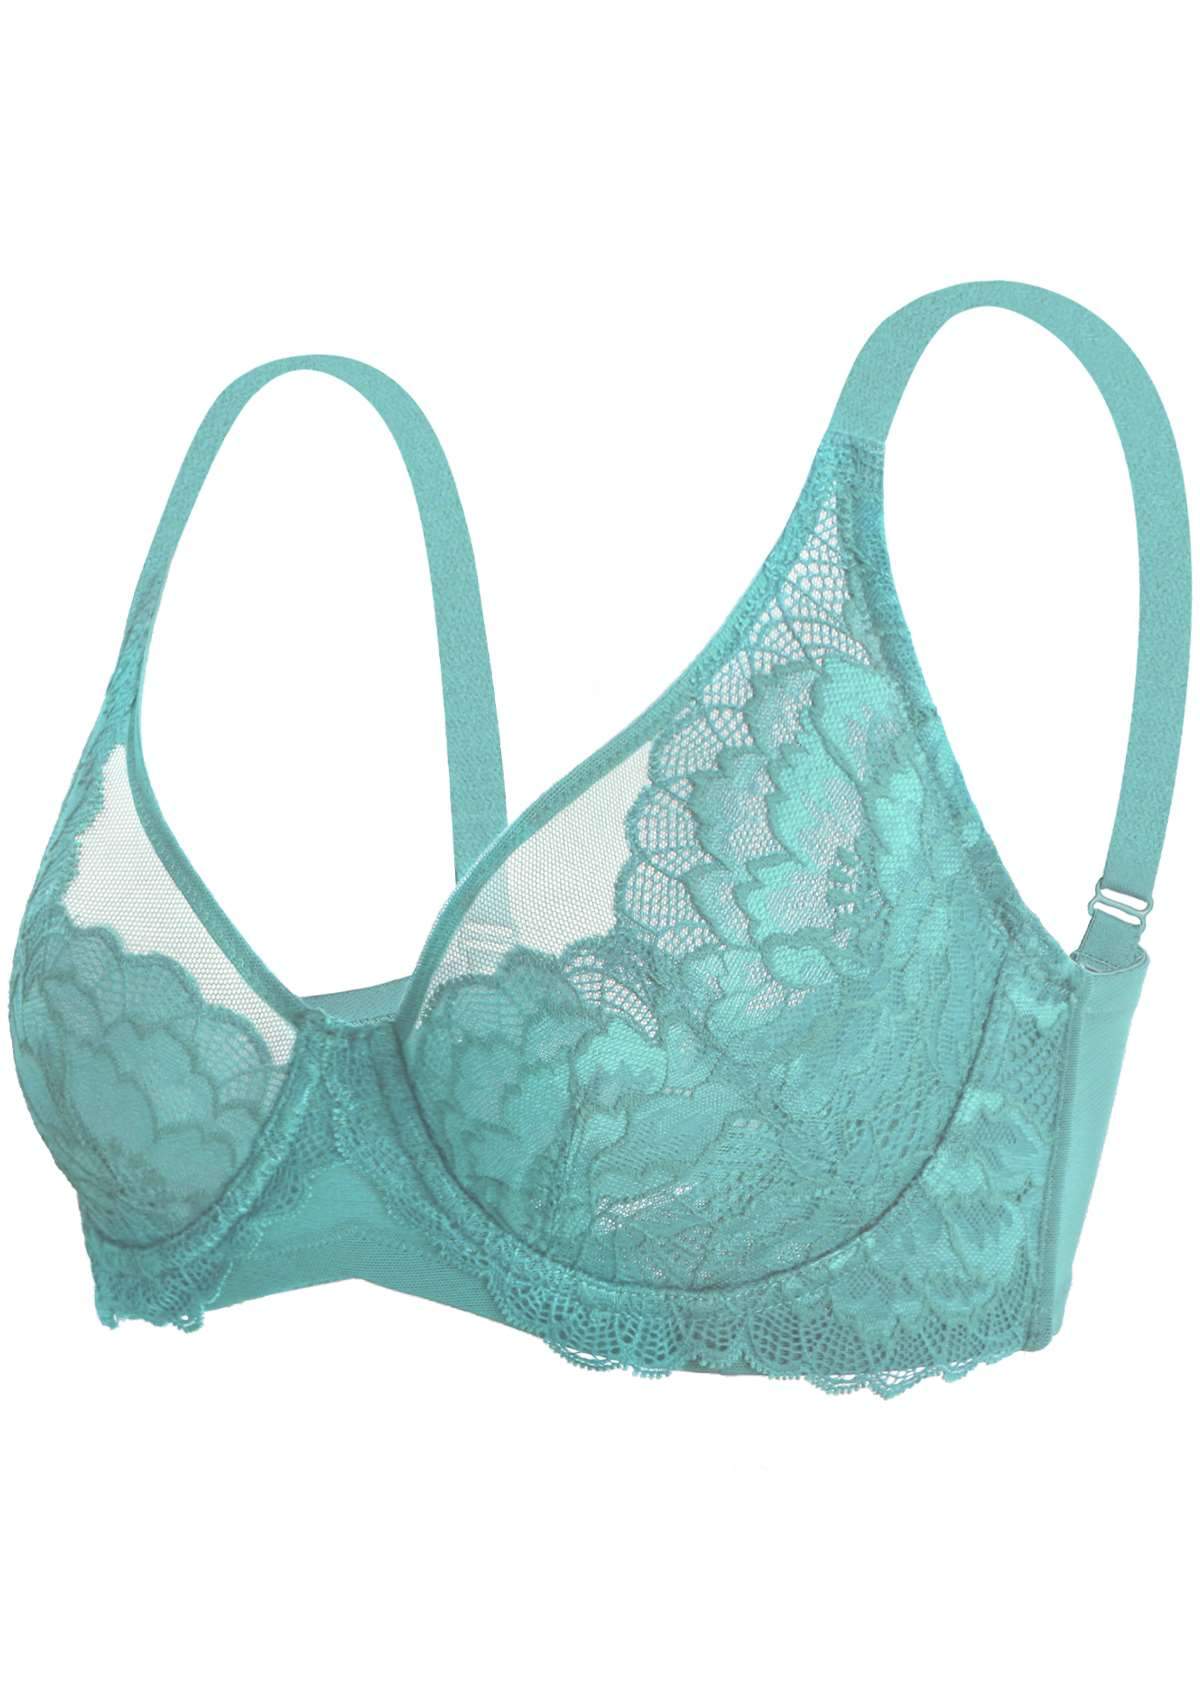 HSIA Peony Lace Unlined Supportive Underwire Bra - Dark Blue / 40 / D